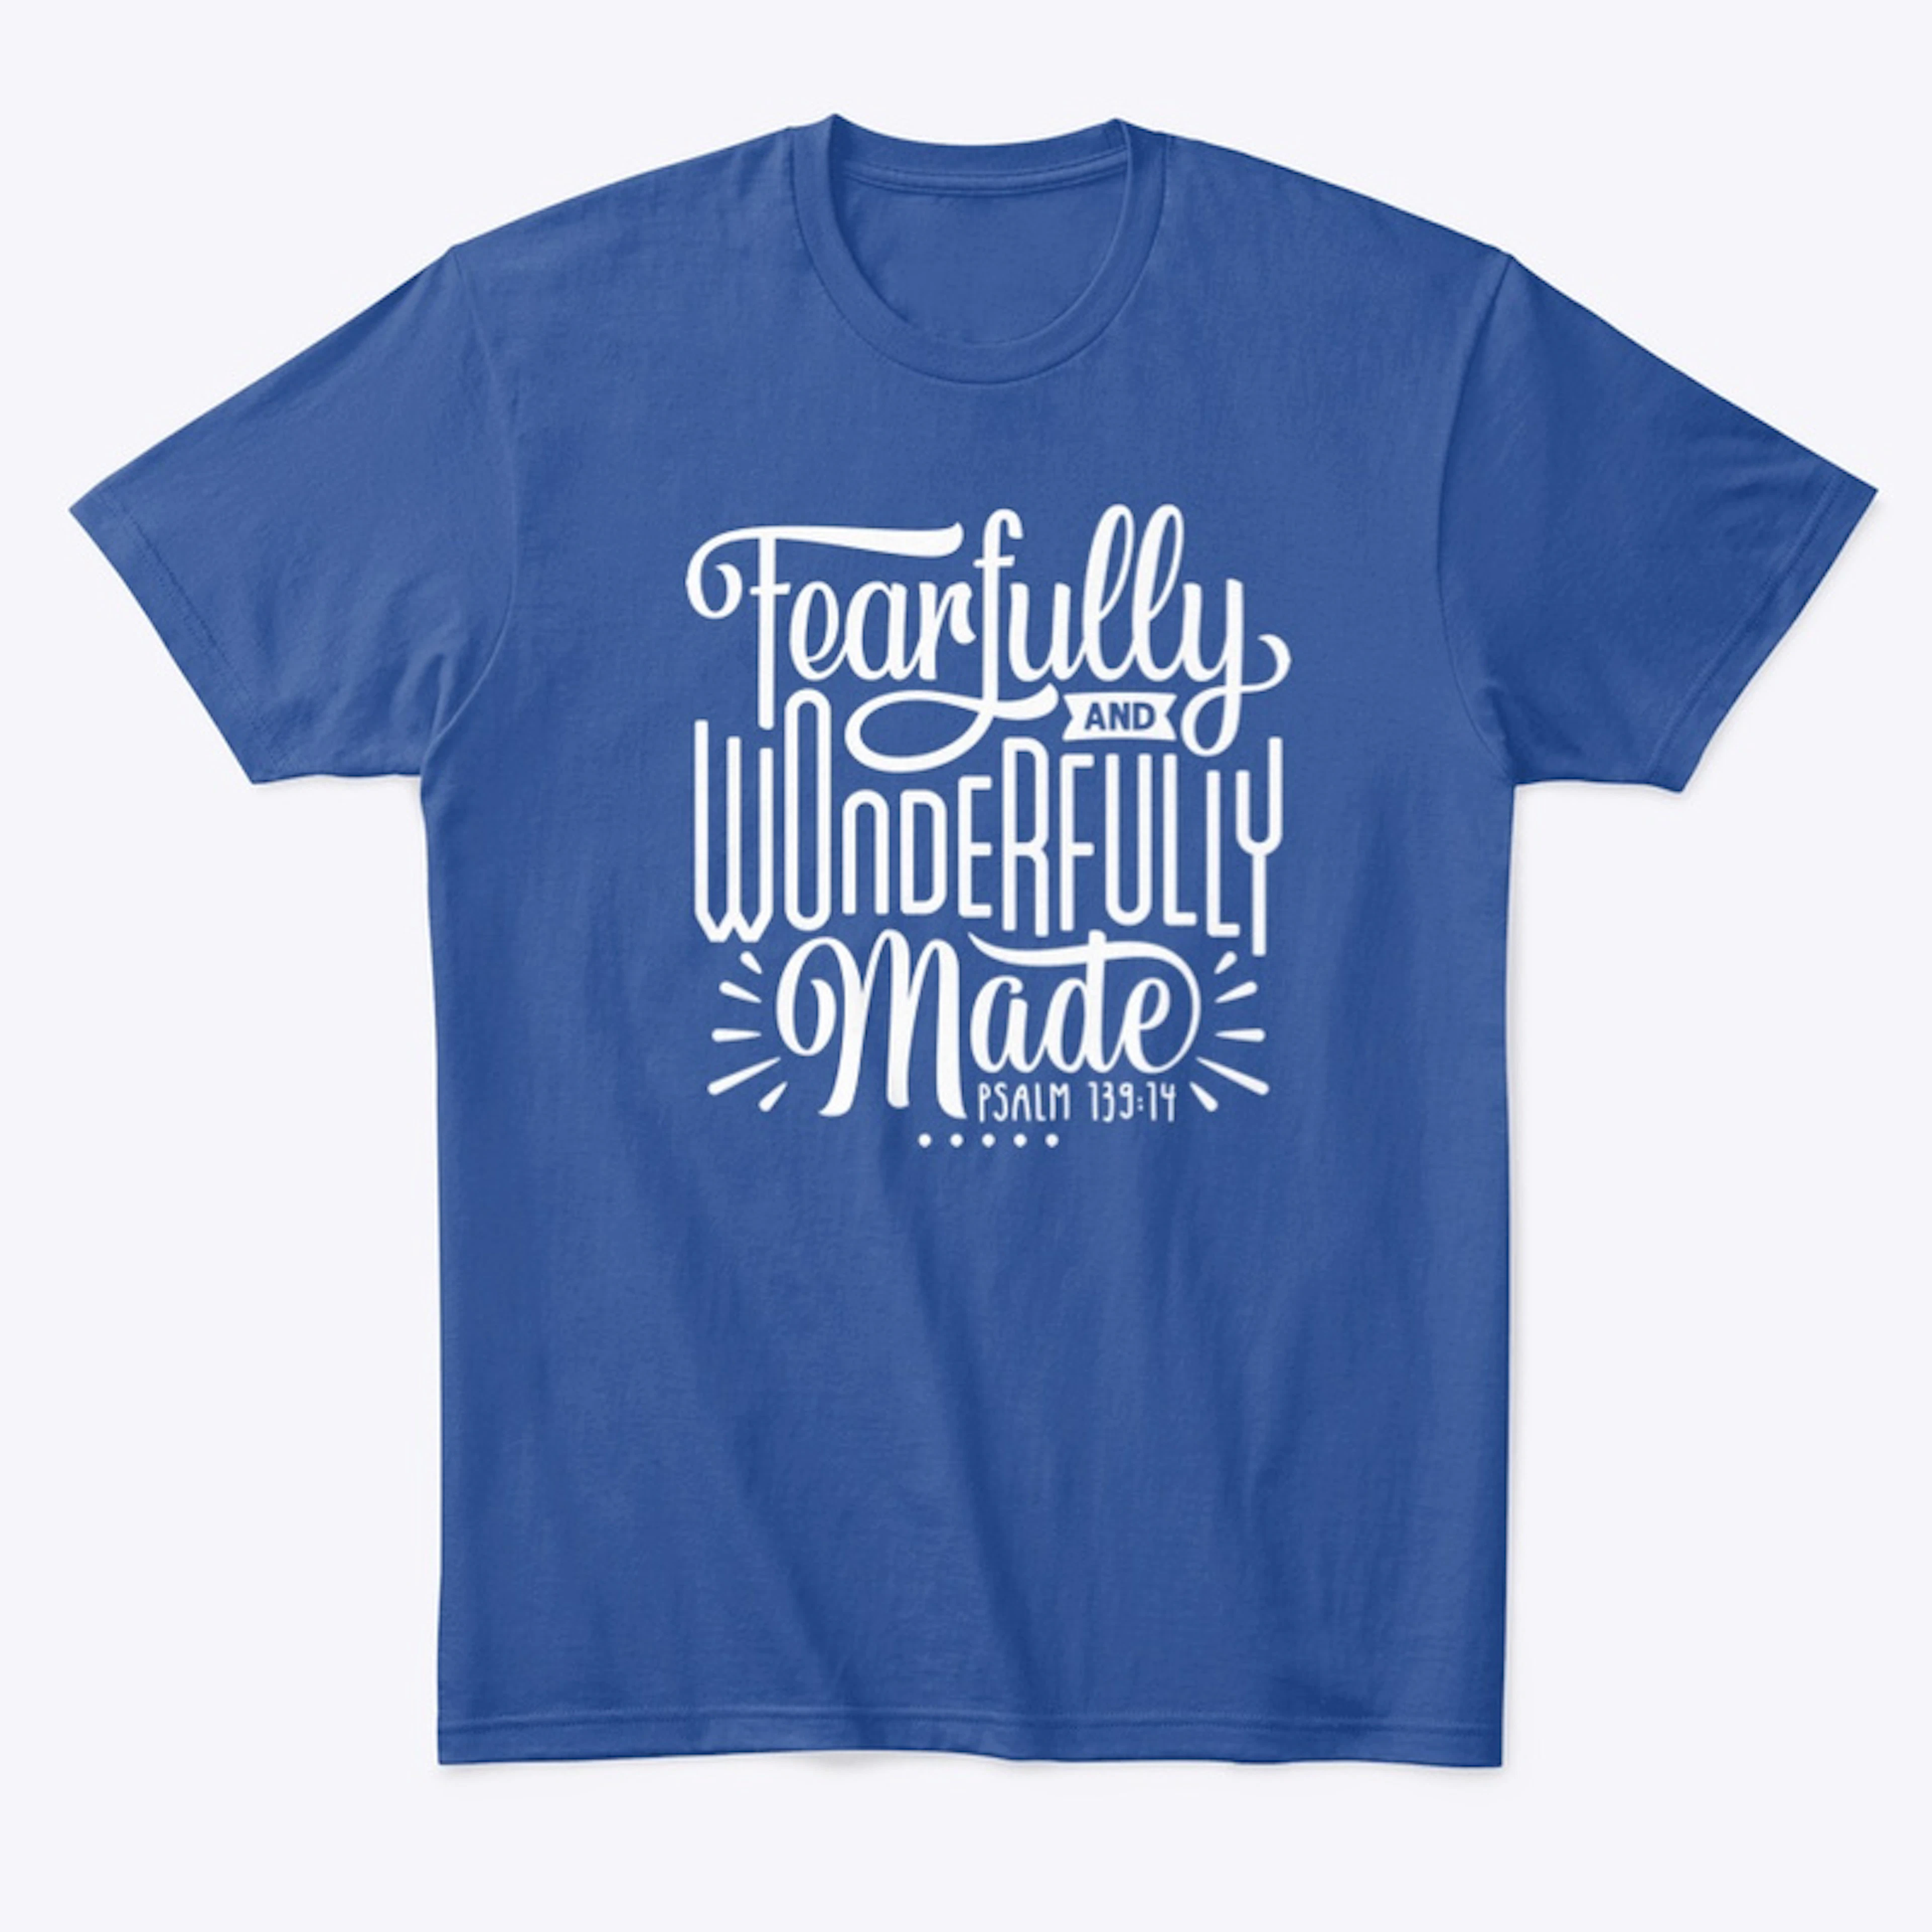 "Fearfully And Wonderfully Made"